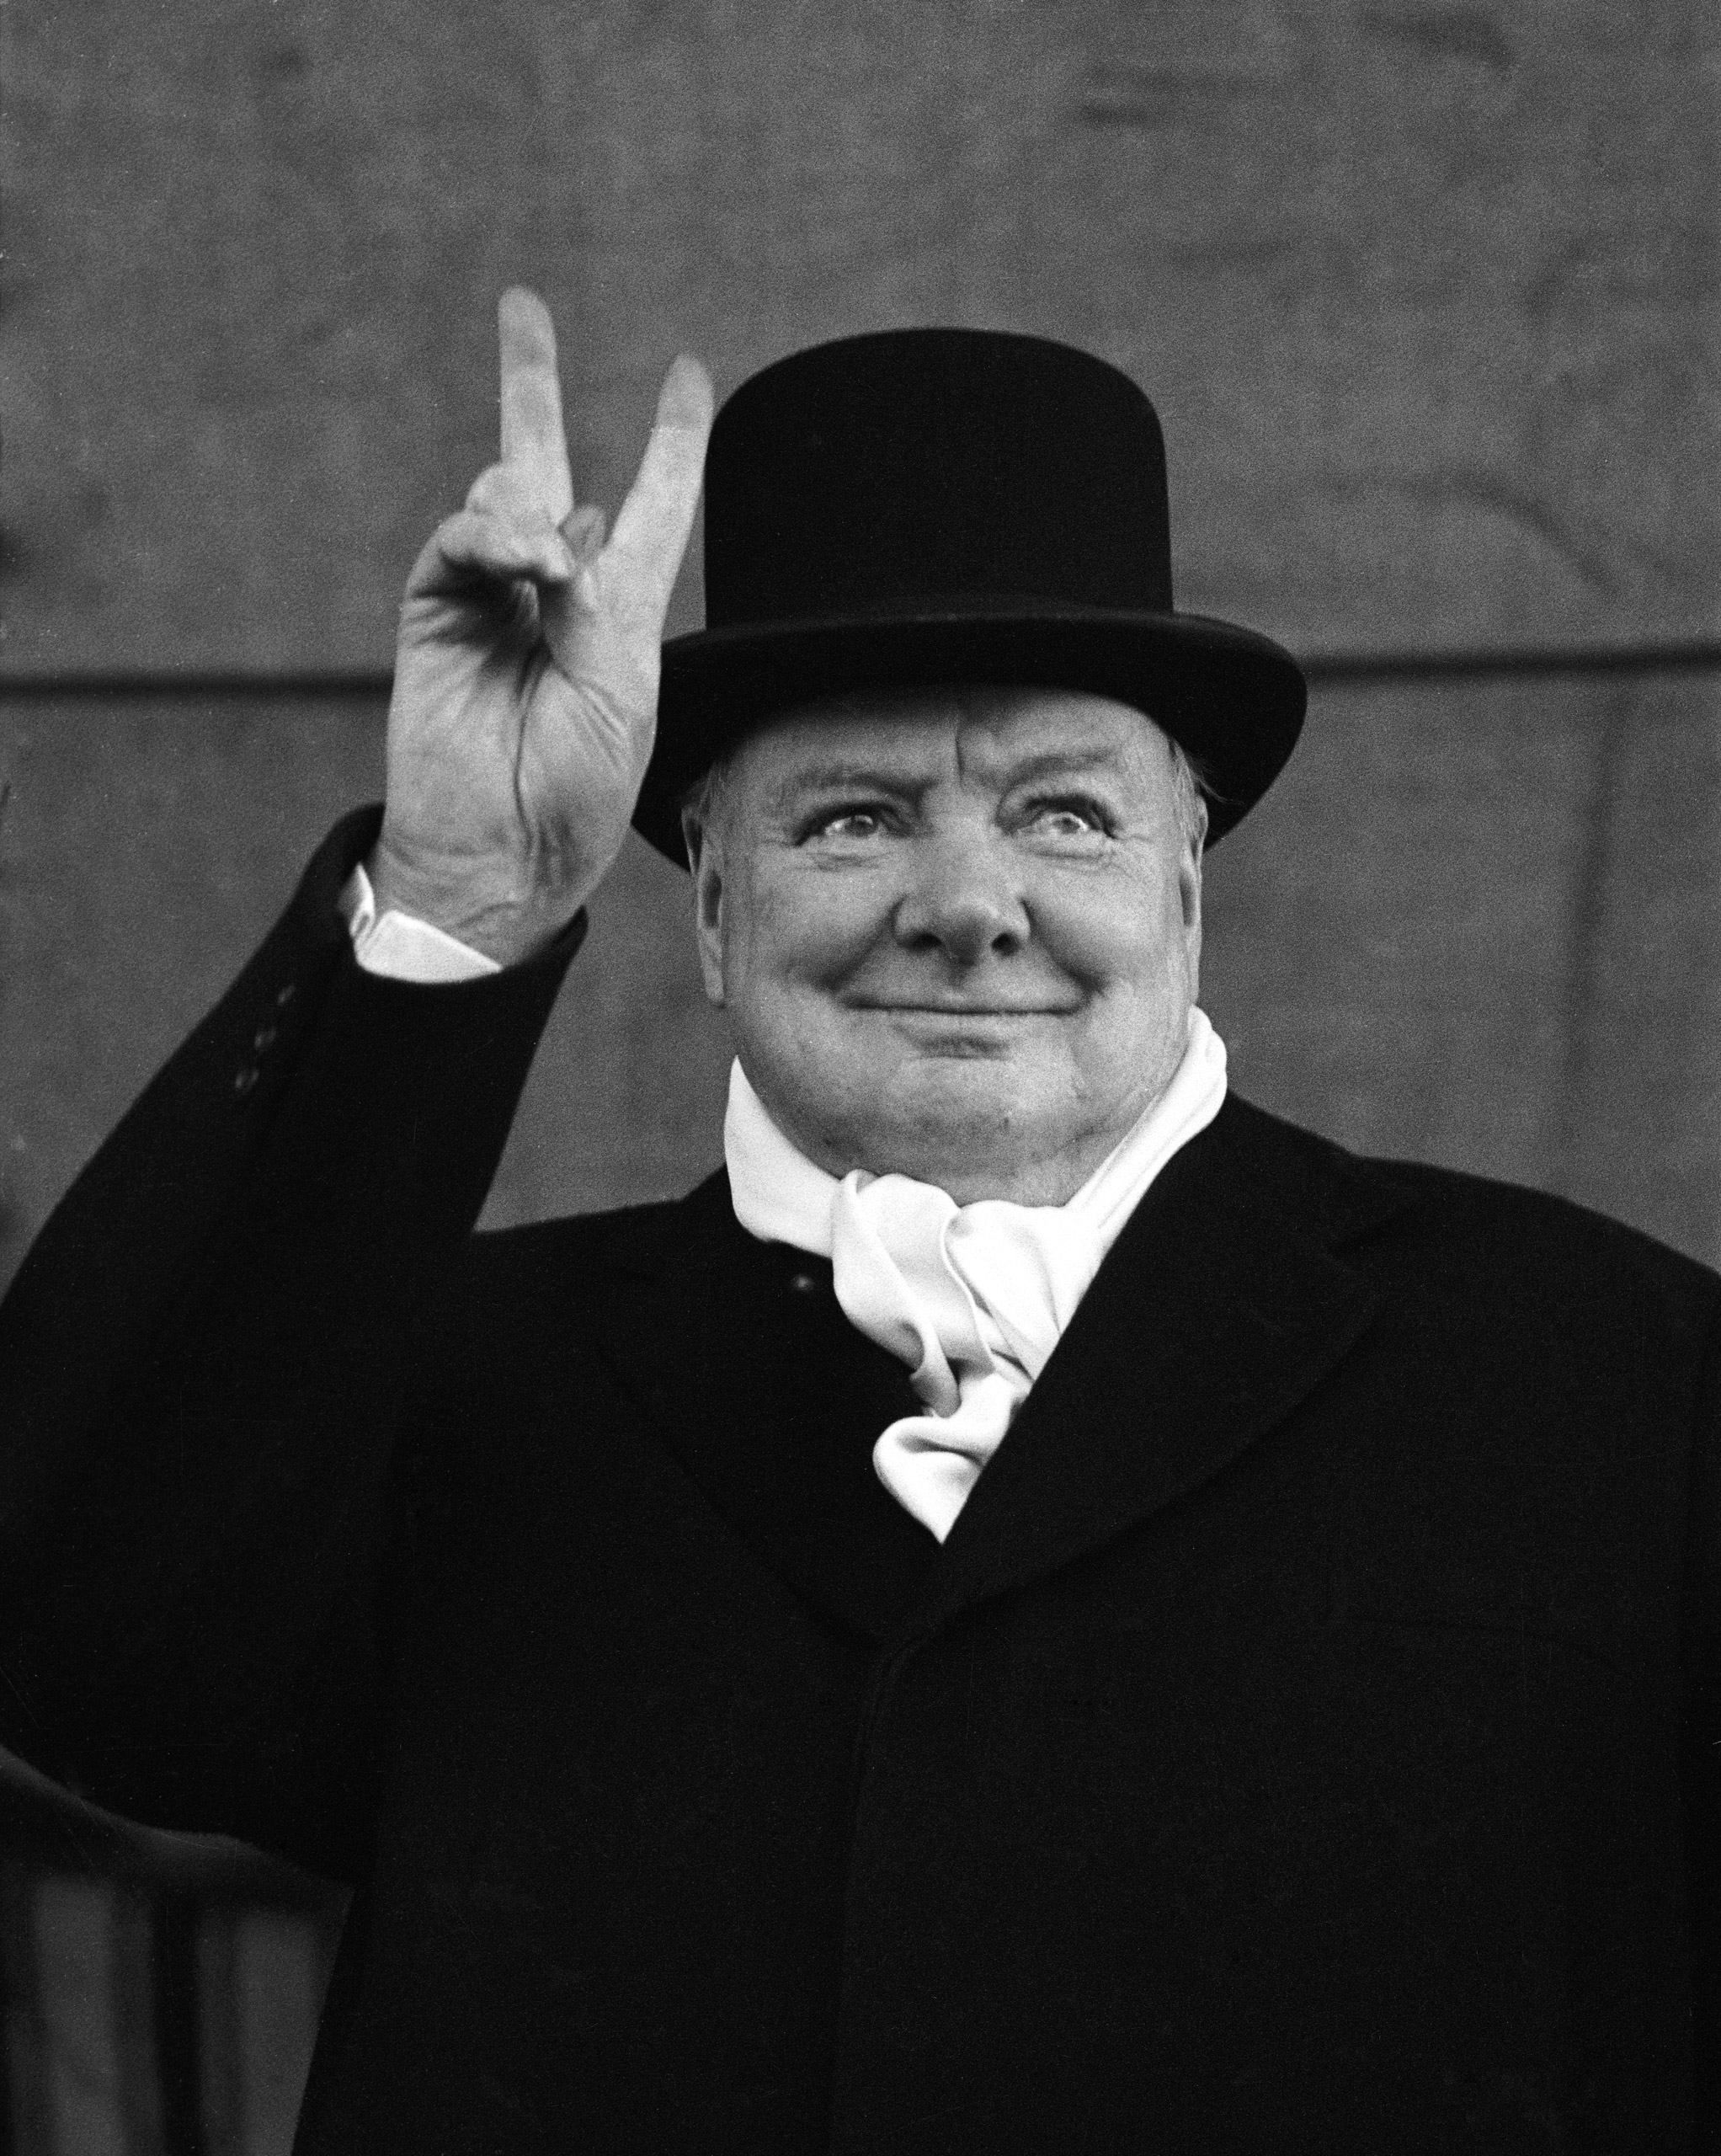 British PM Winston Churchill sporting top hat with coat and scarf.